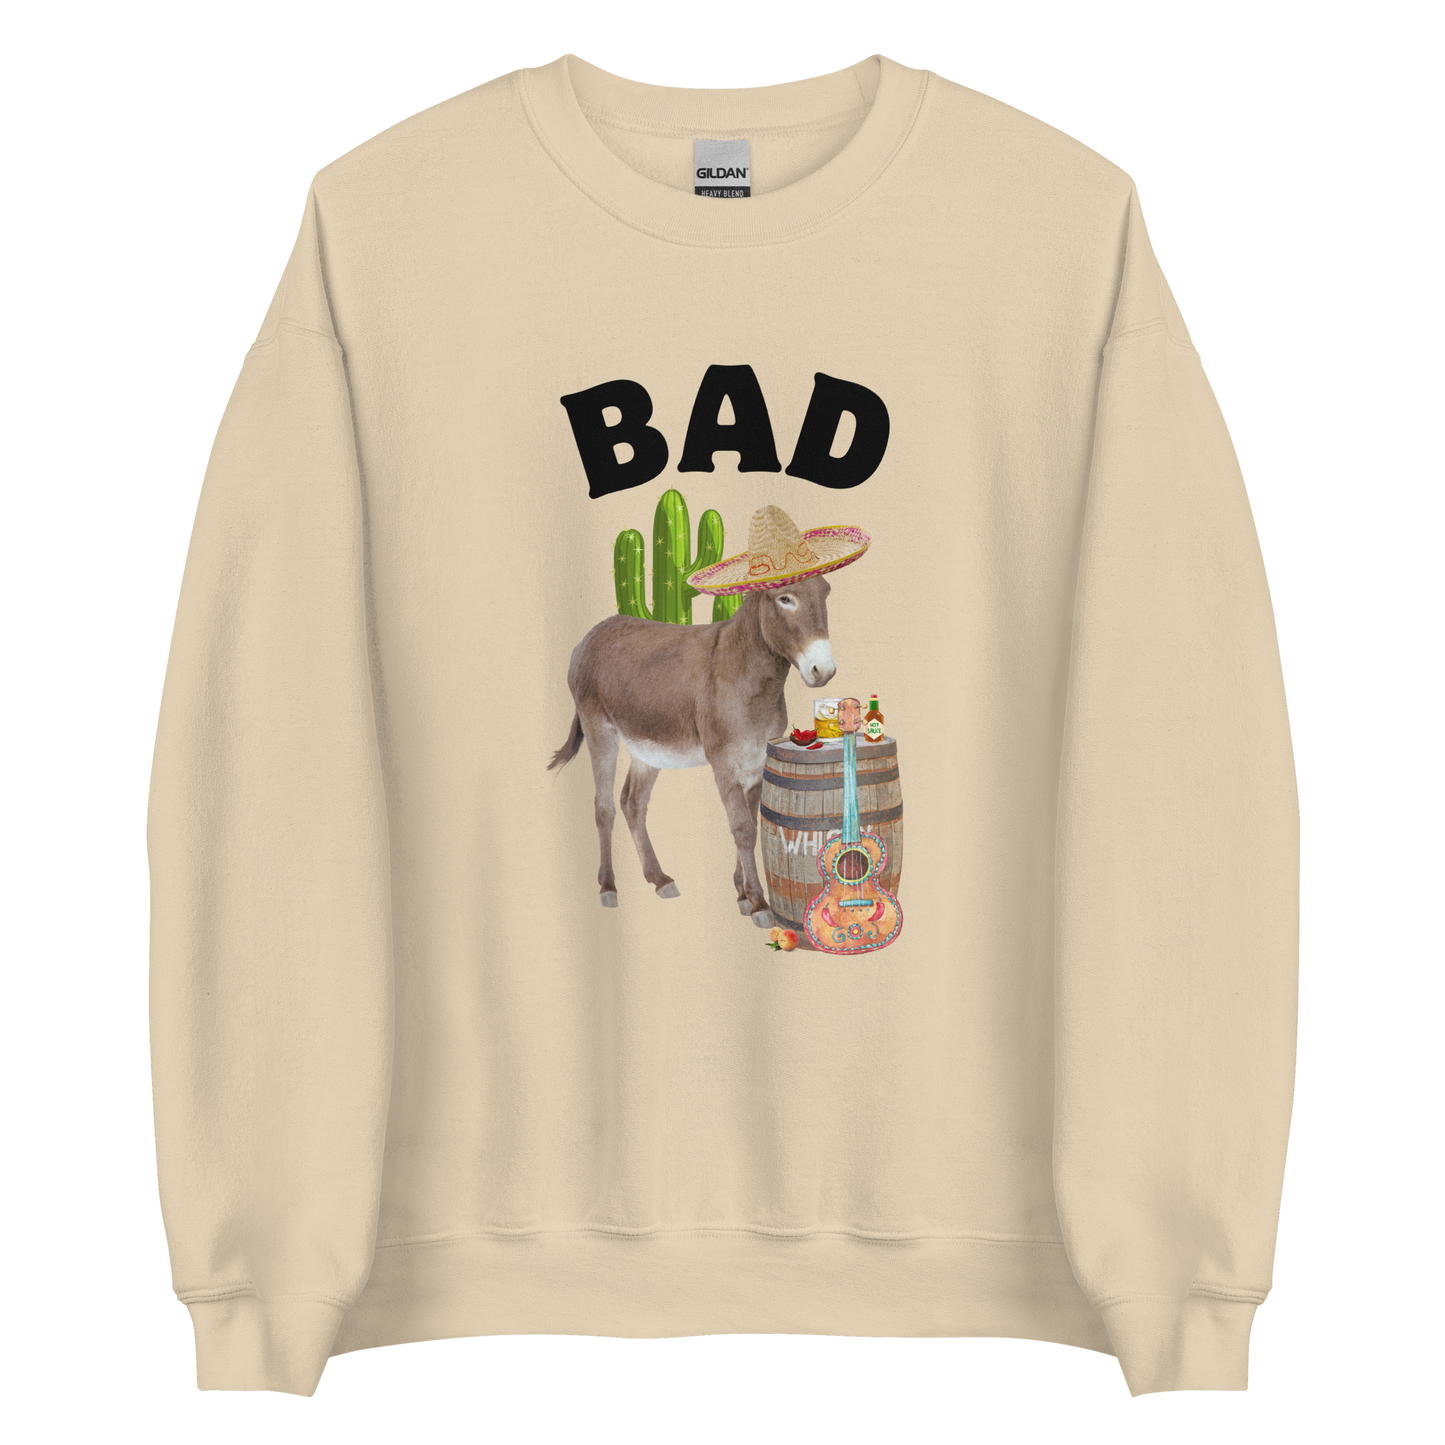 Sand Color Donkey Sweatshirt featuring a Funny Bad Ass Donkey graphic on the chest - Funny Graphic Bad Ass Donkey Sweatshirts - Boozy Fox